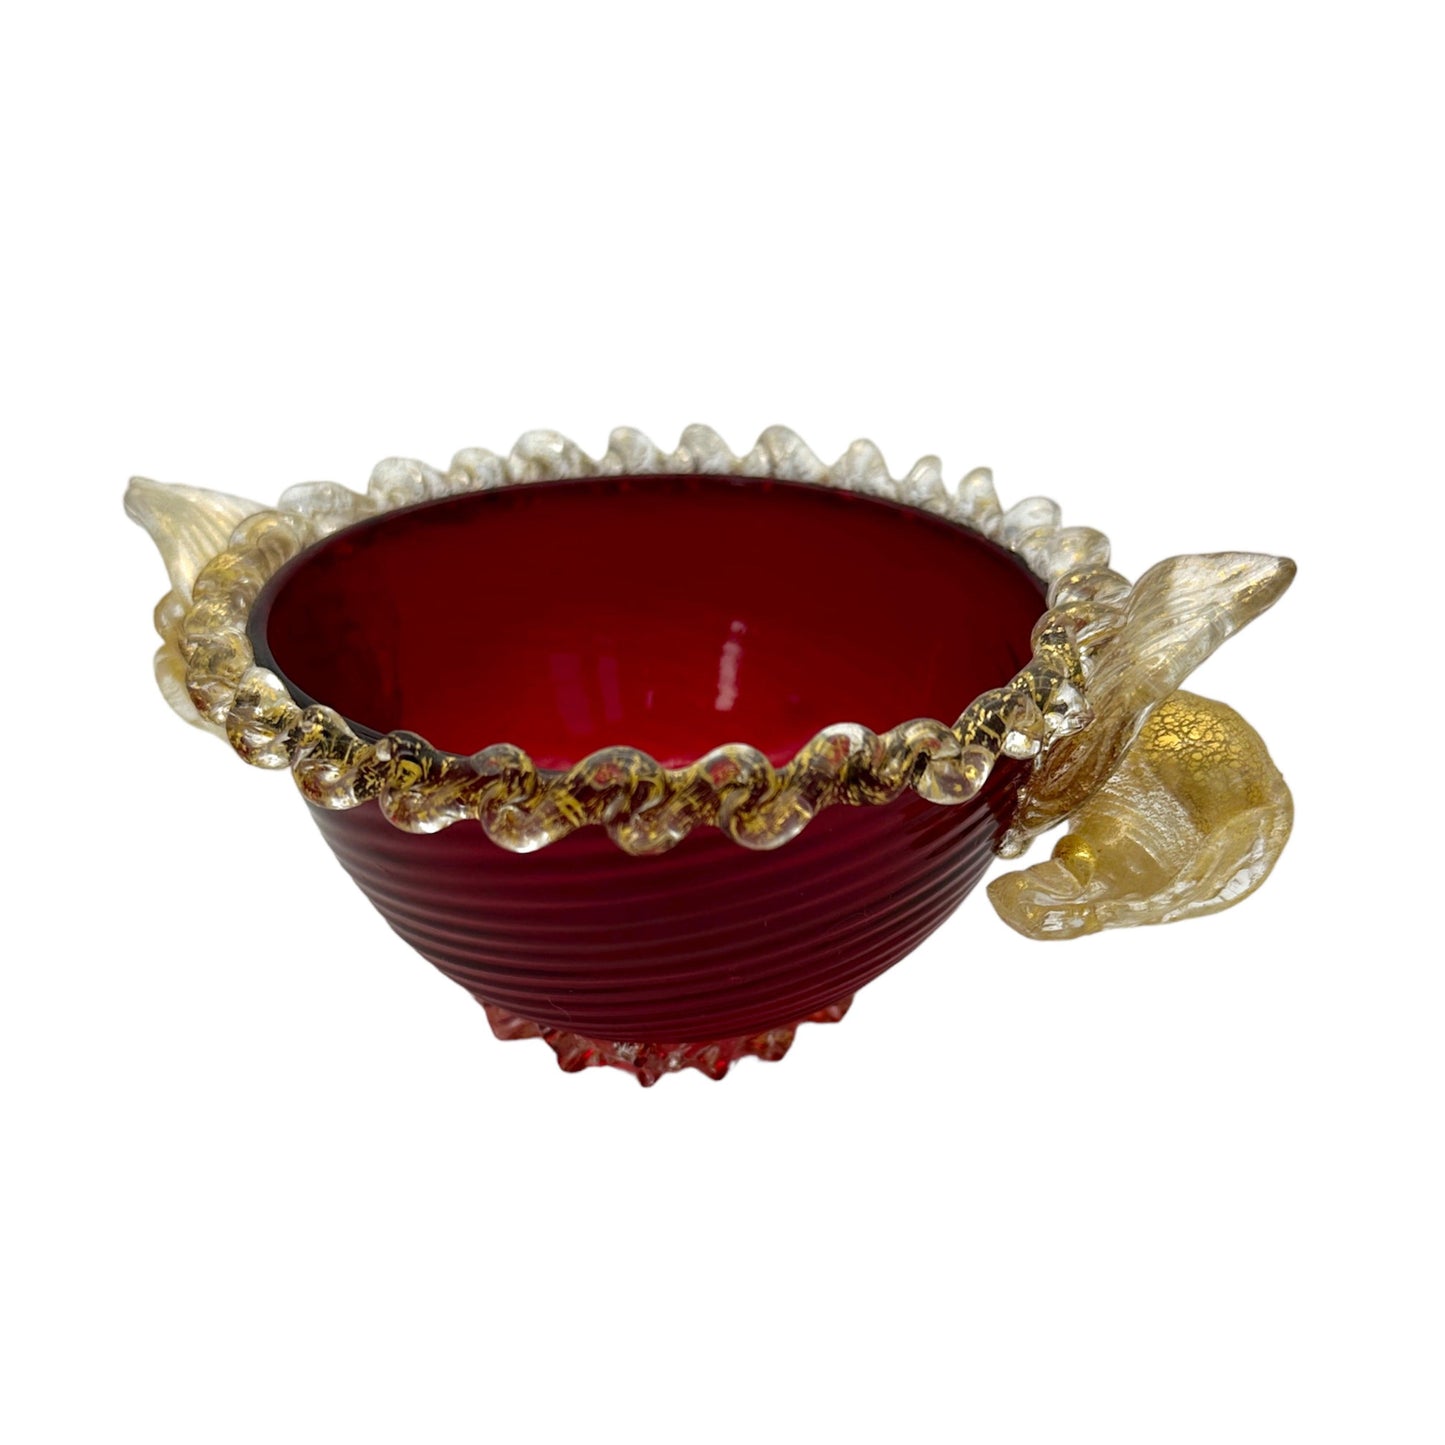 Vintage Murano Glass Bowl in Vibrant Red: Exquisite and Highly Collectible